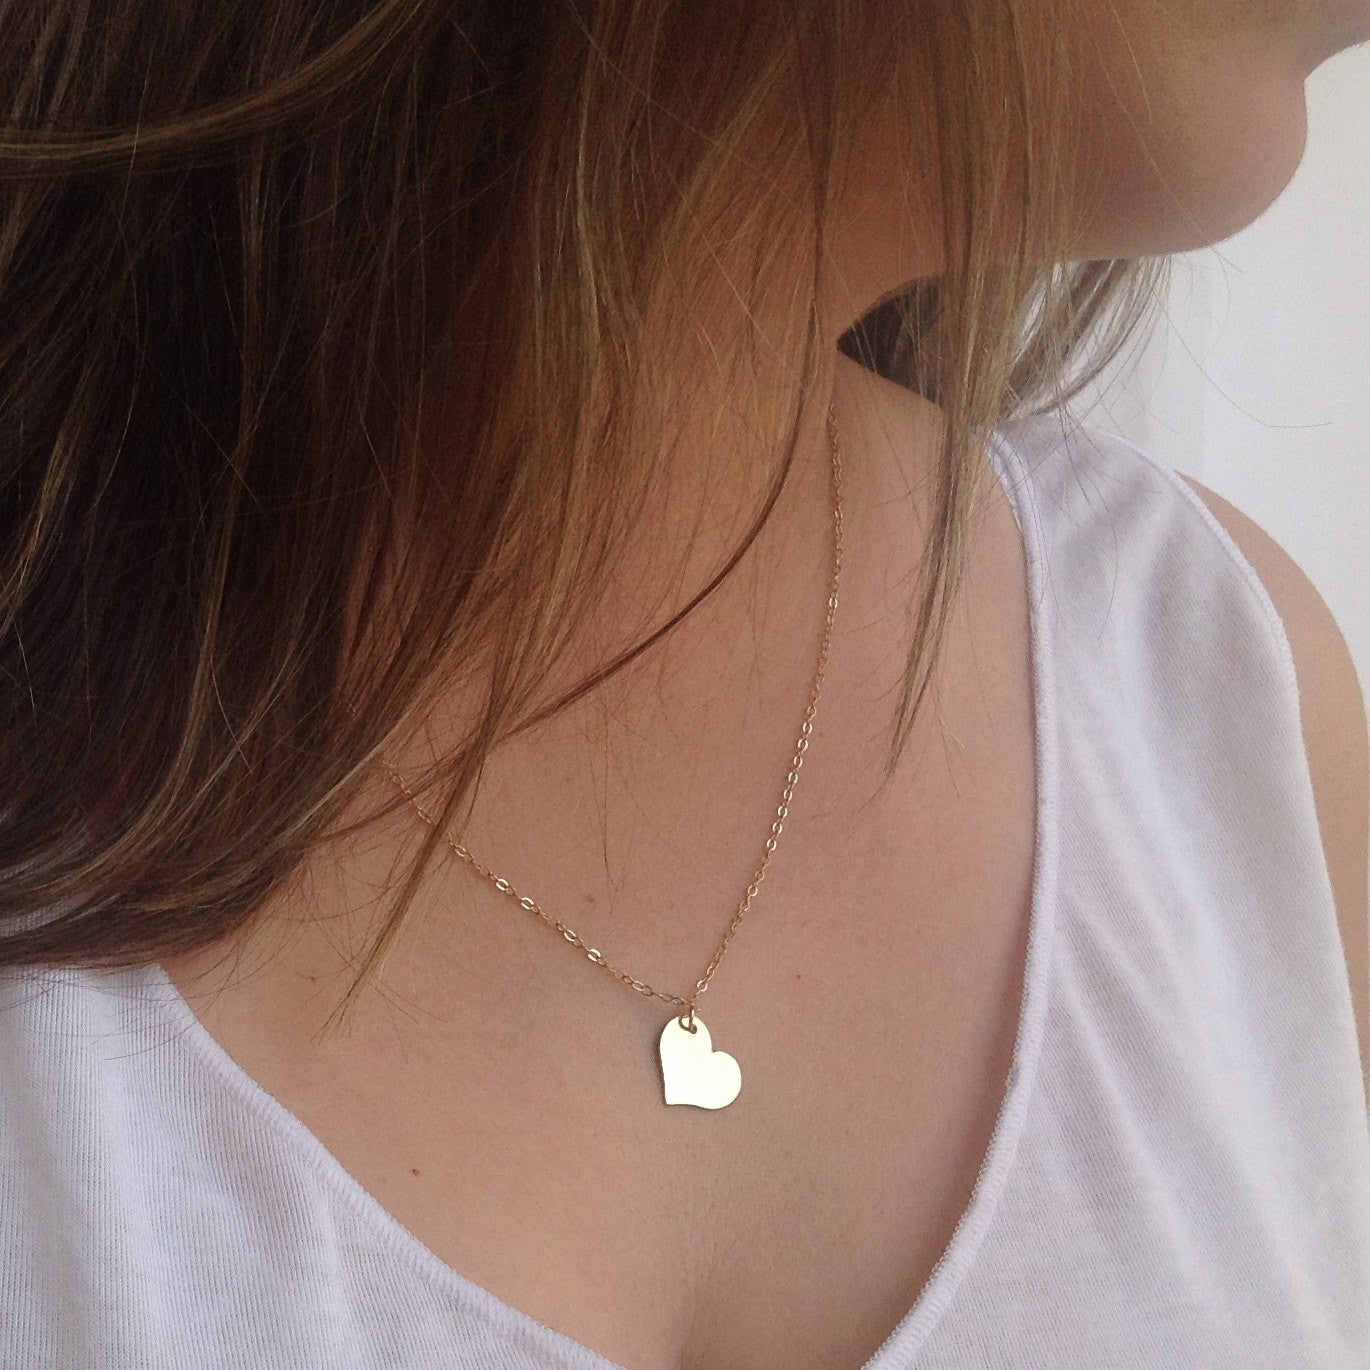 Gold filled heart necklace